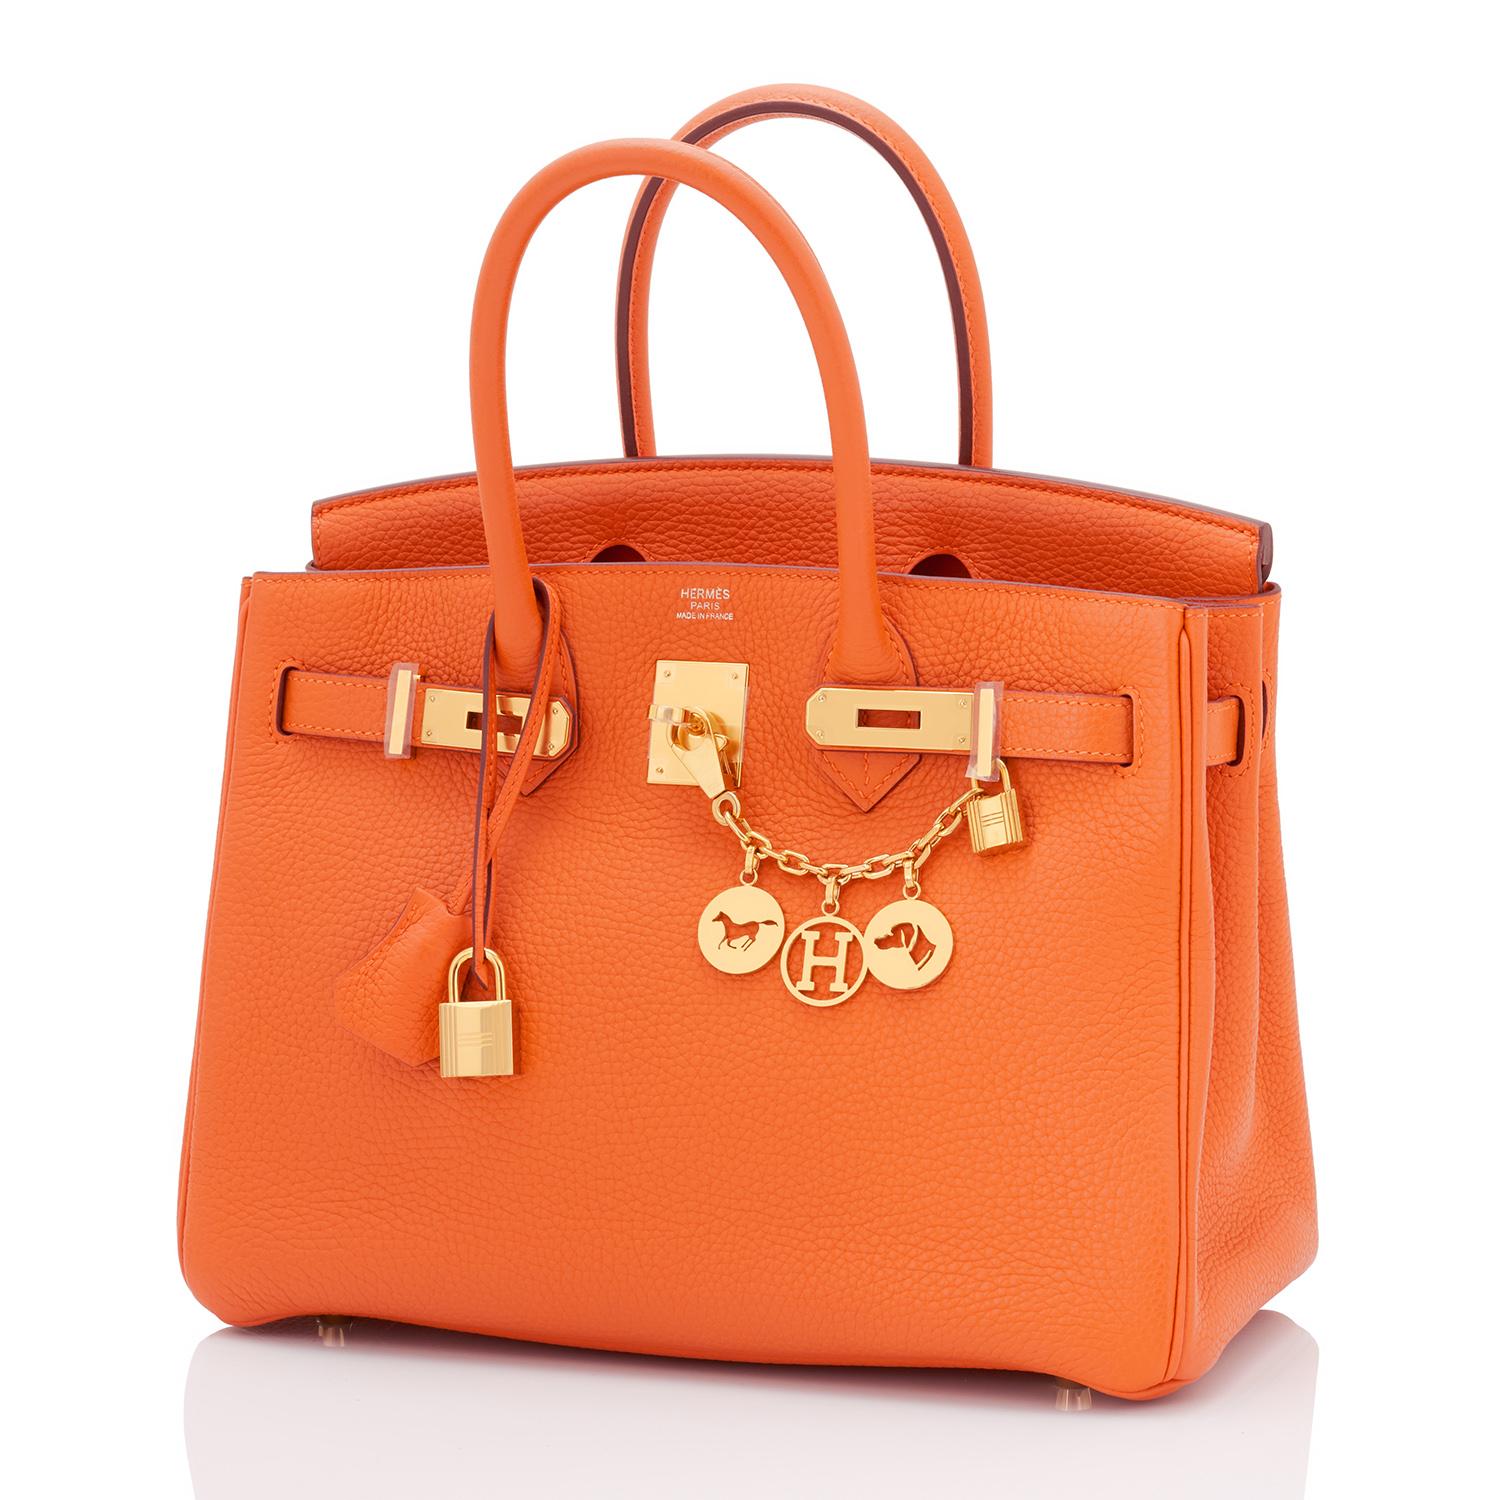 Hermes Birkin 30 Classic Hermes Orange Birkin Gold Hardware
Ultra coveted and rare combination- long discontinued Hermes Classic Orange with Gold Hardware!
Excellent Condition (with plastic on hardware). Comes with keys, lock, clochette, two